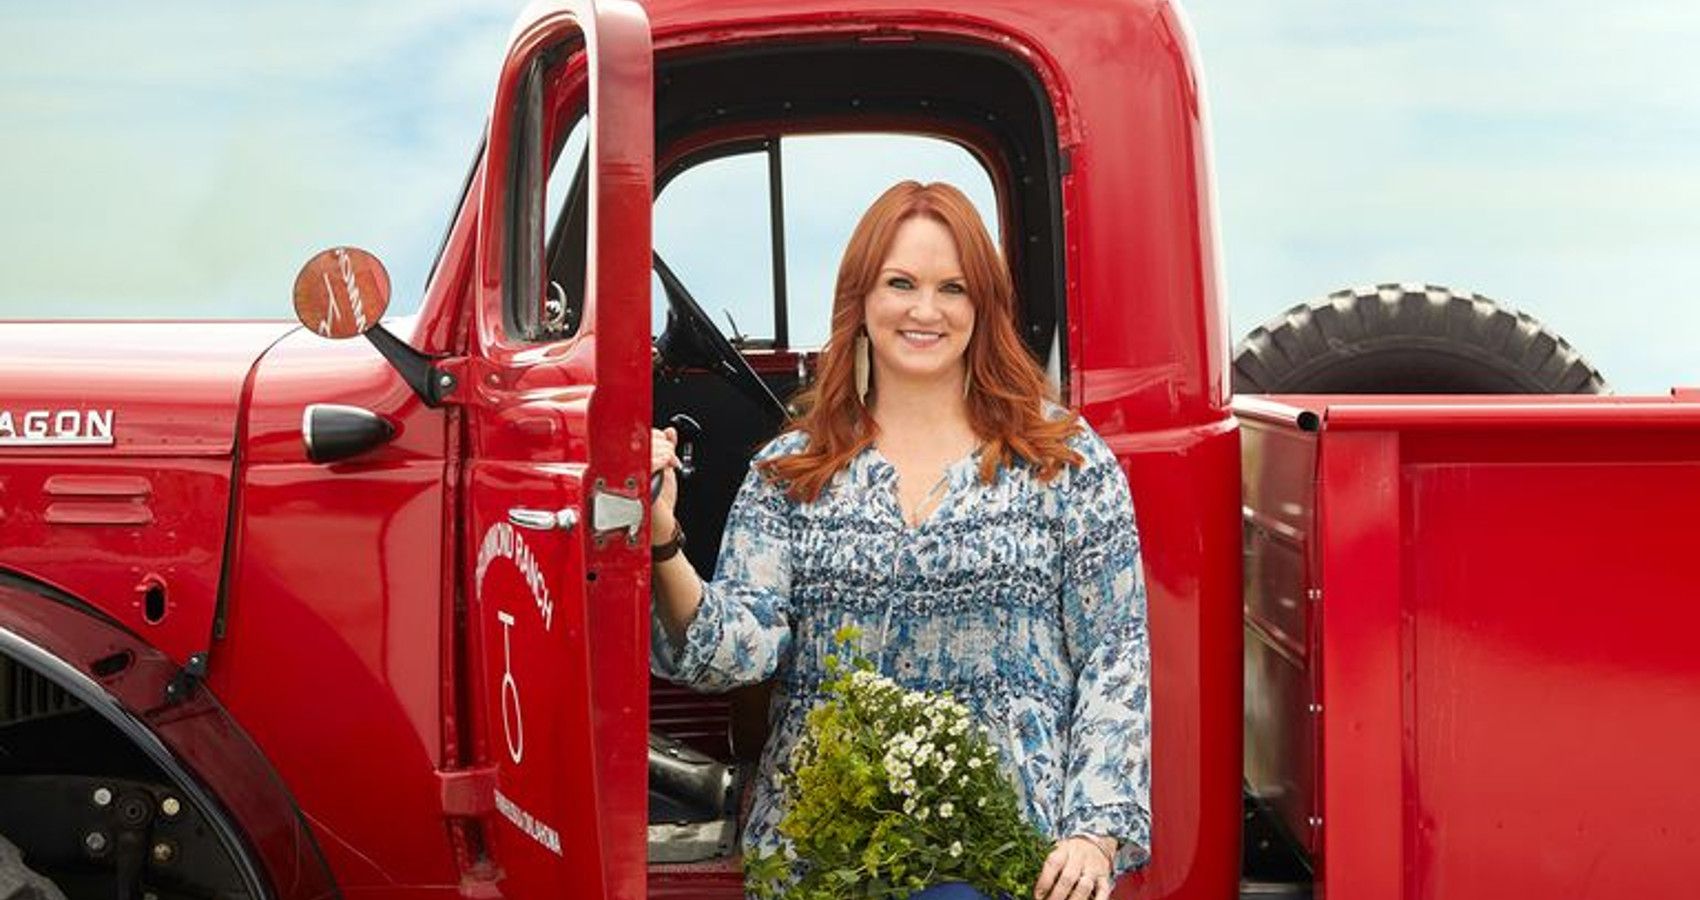 The Pioneer Woman' Ree Drummond Turned Her Hobby Into A Major Career